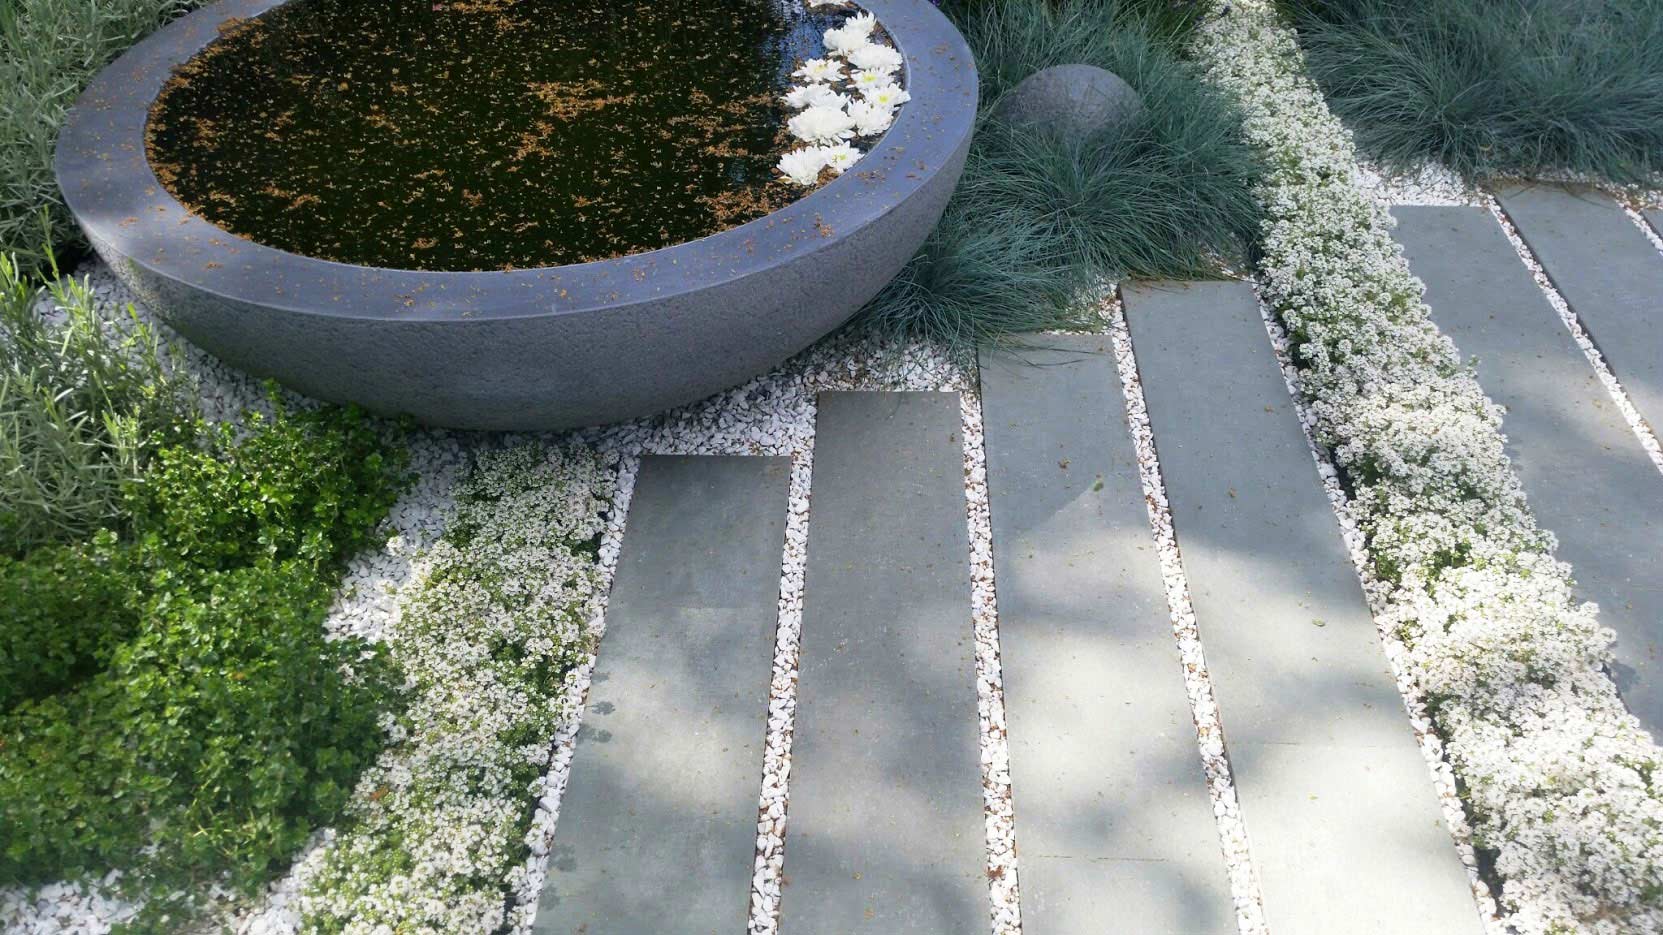 Waterbowl and stone paving in a garden designed by Rae Wilkinson